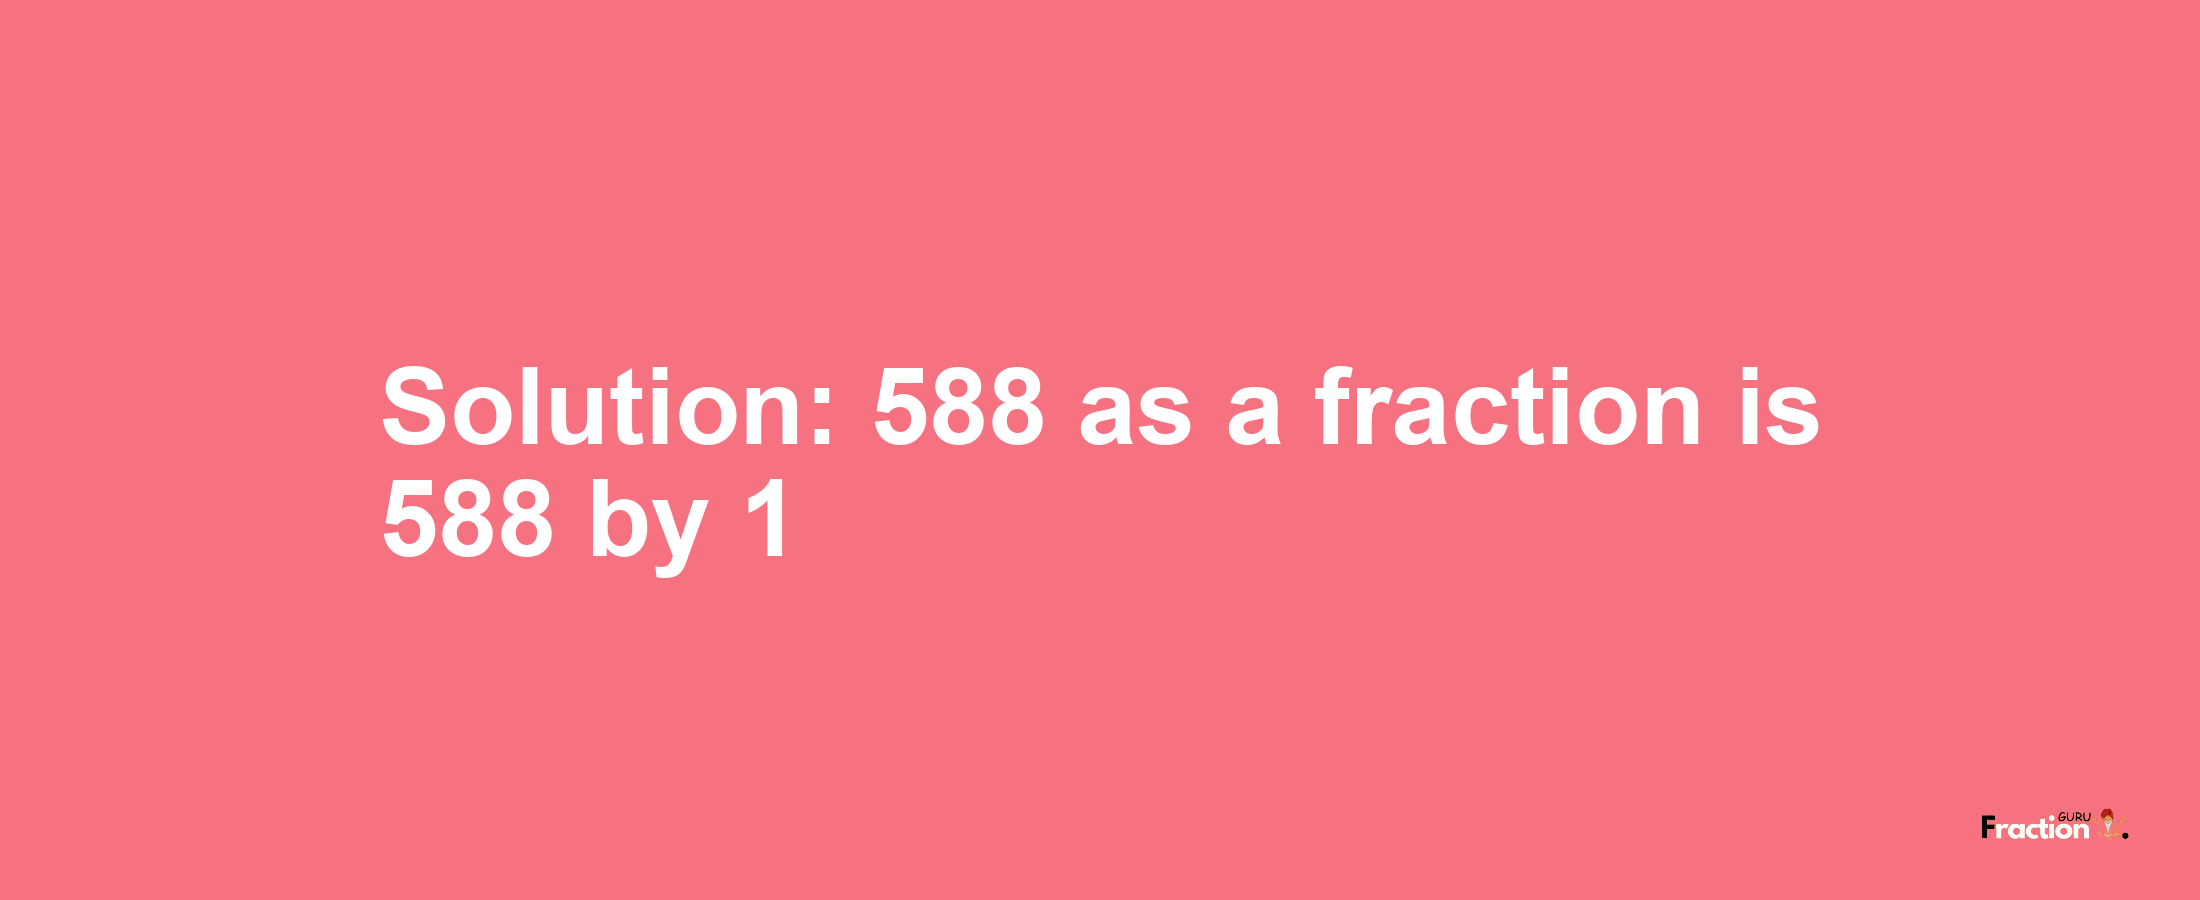 Solution:588 as a fraction is 588/1